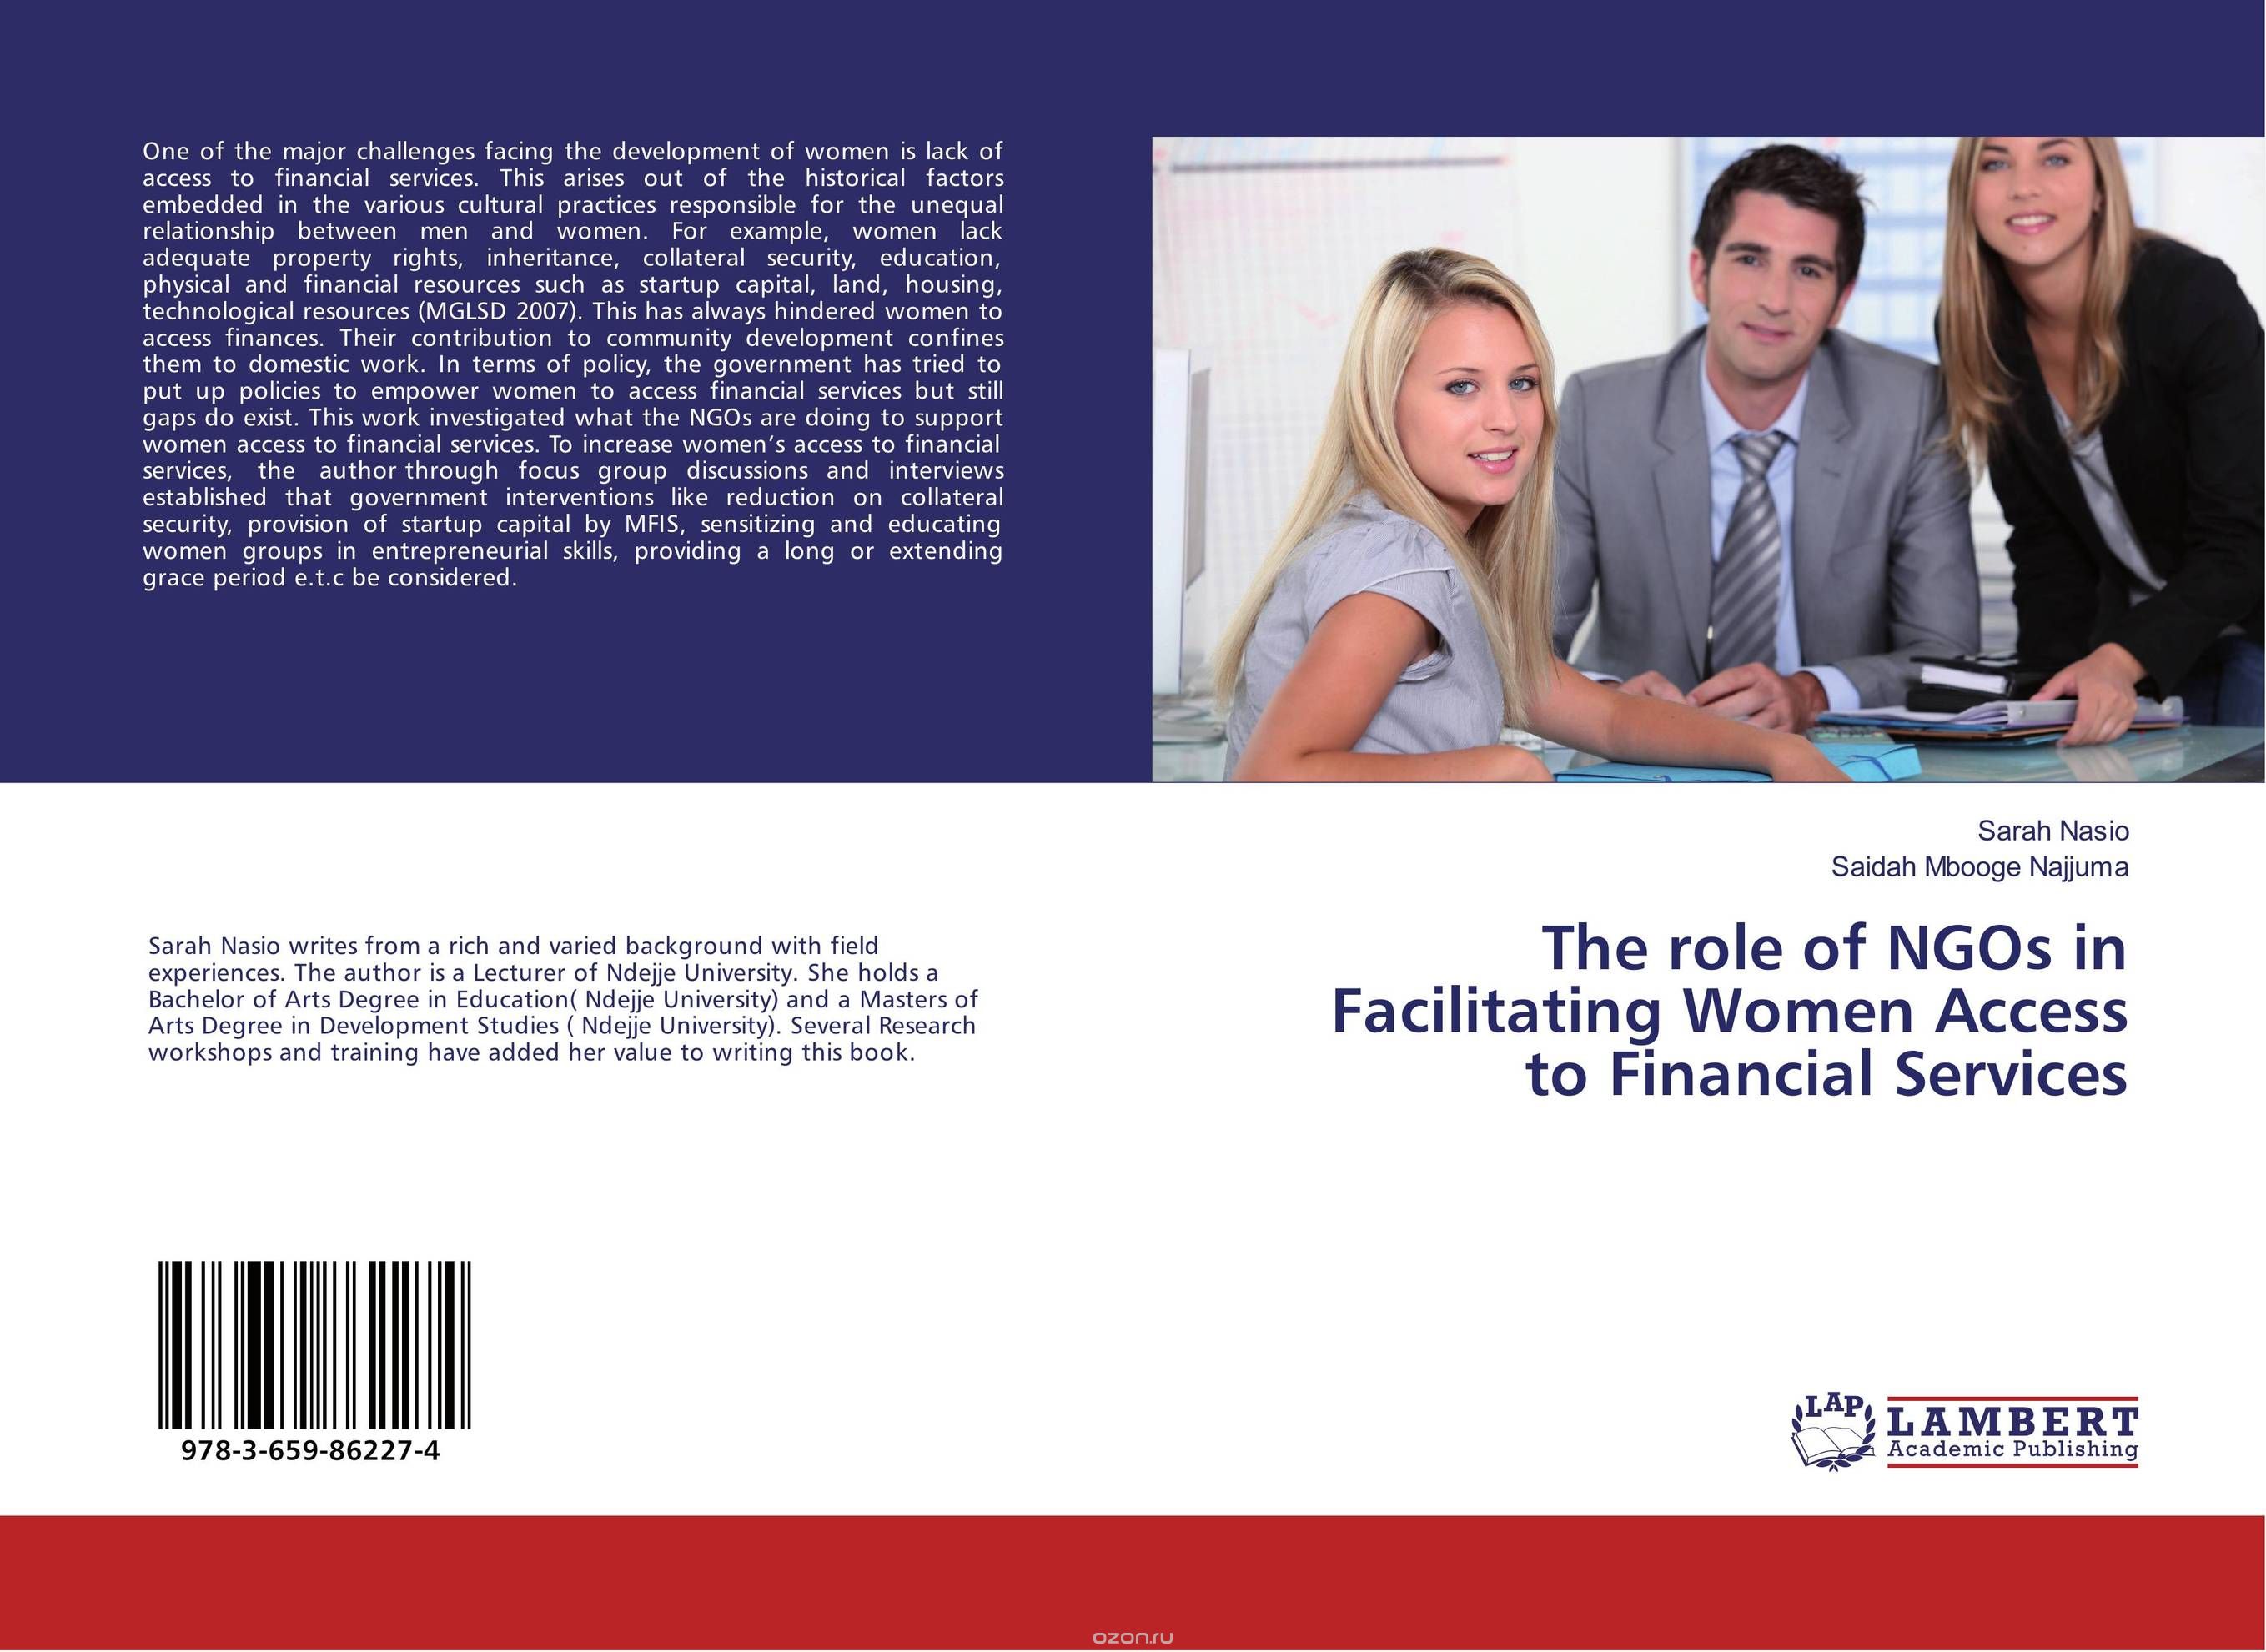 Скачать книгу "The role of NGOs in Facilitating Women Access to Financial Services"